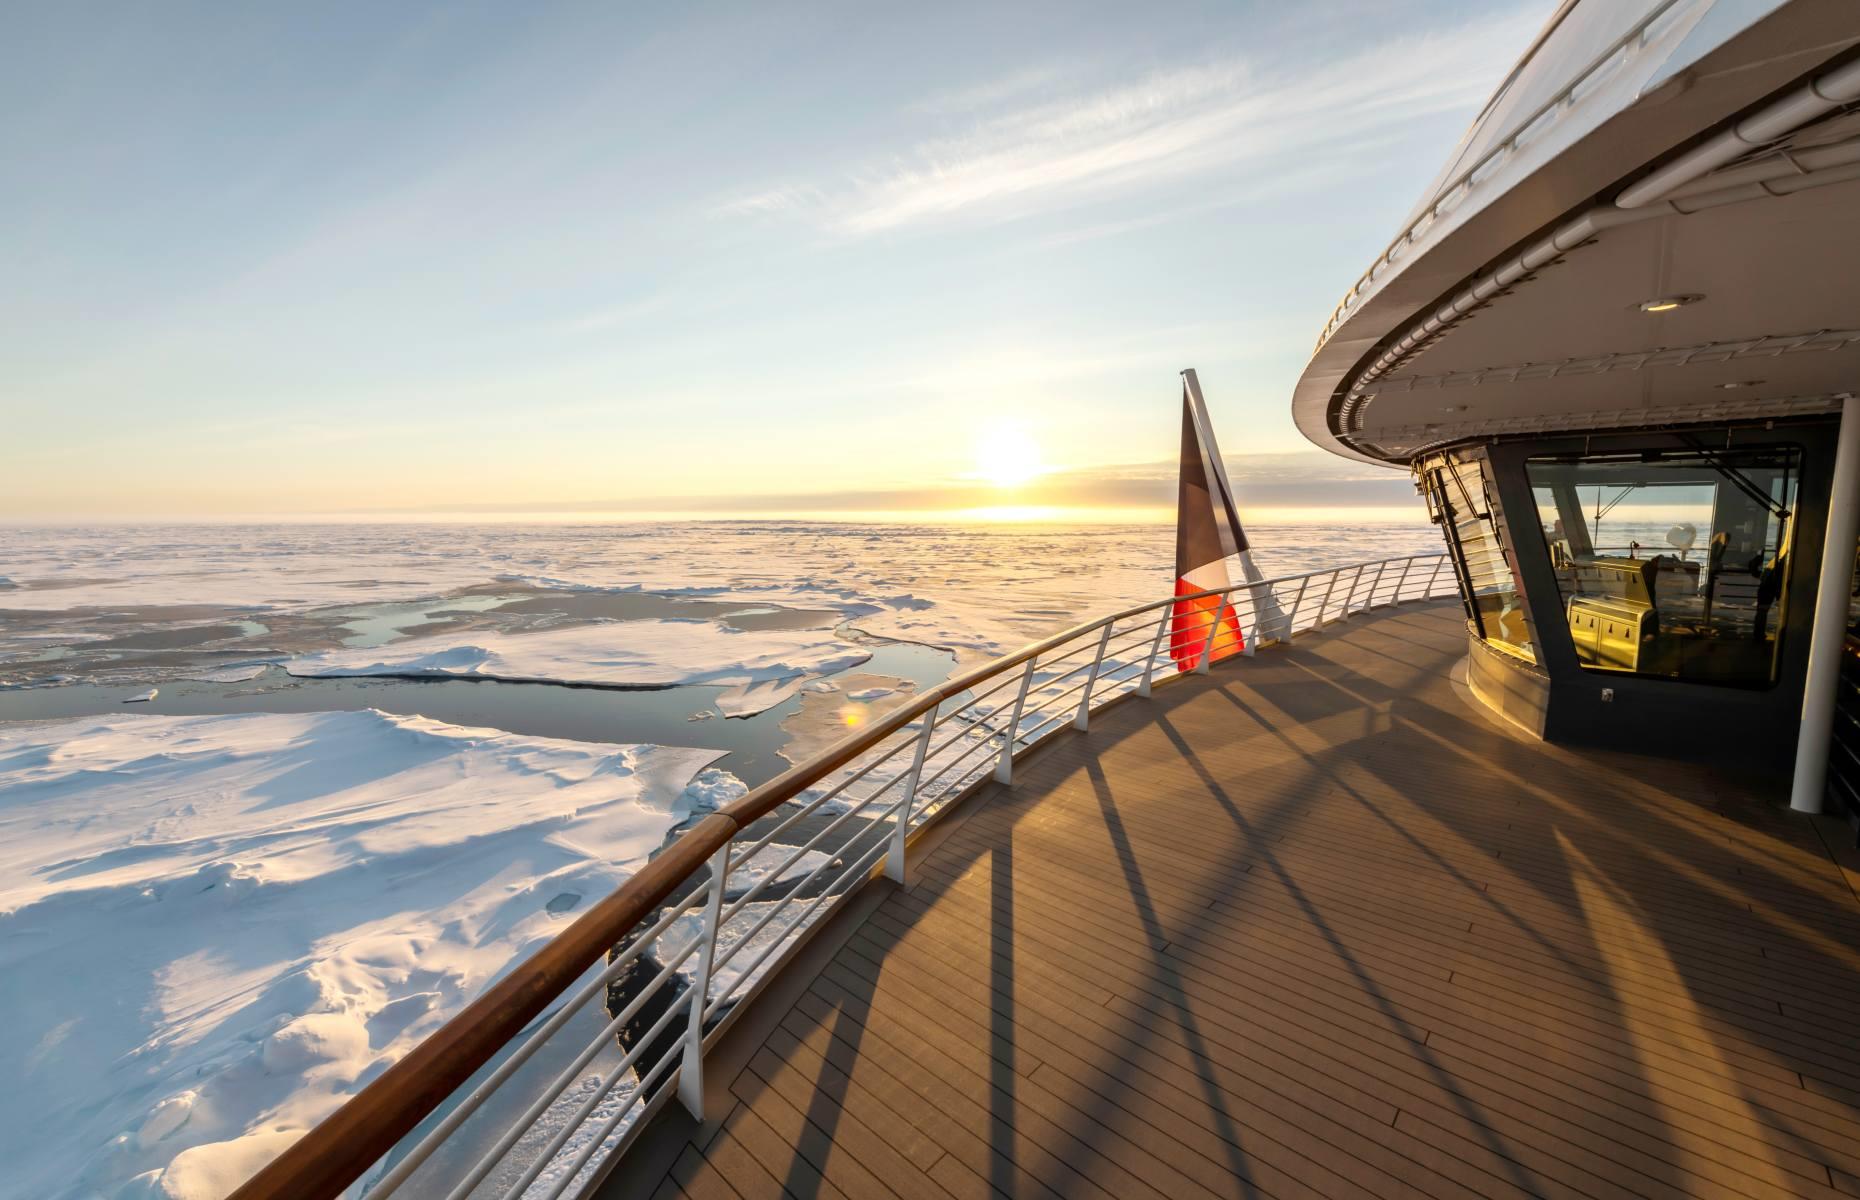 <p>Luxury cruise lines are going all out to provide fascinating insights into the explorers who first mapped these regions. In 2024, Scenic launches several East Antarctic cruises focusing on the routes taken by explorer Sir Ernest Shackleton. If you sail through the Arctic on Ponant’s Le Commandant Charcot (the world’s only luxury ice breaker), a team of 23 polar experts will help you gain a whole new perspective on these remote regions.</p>